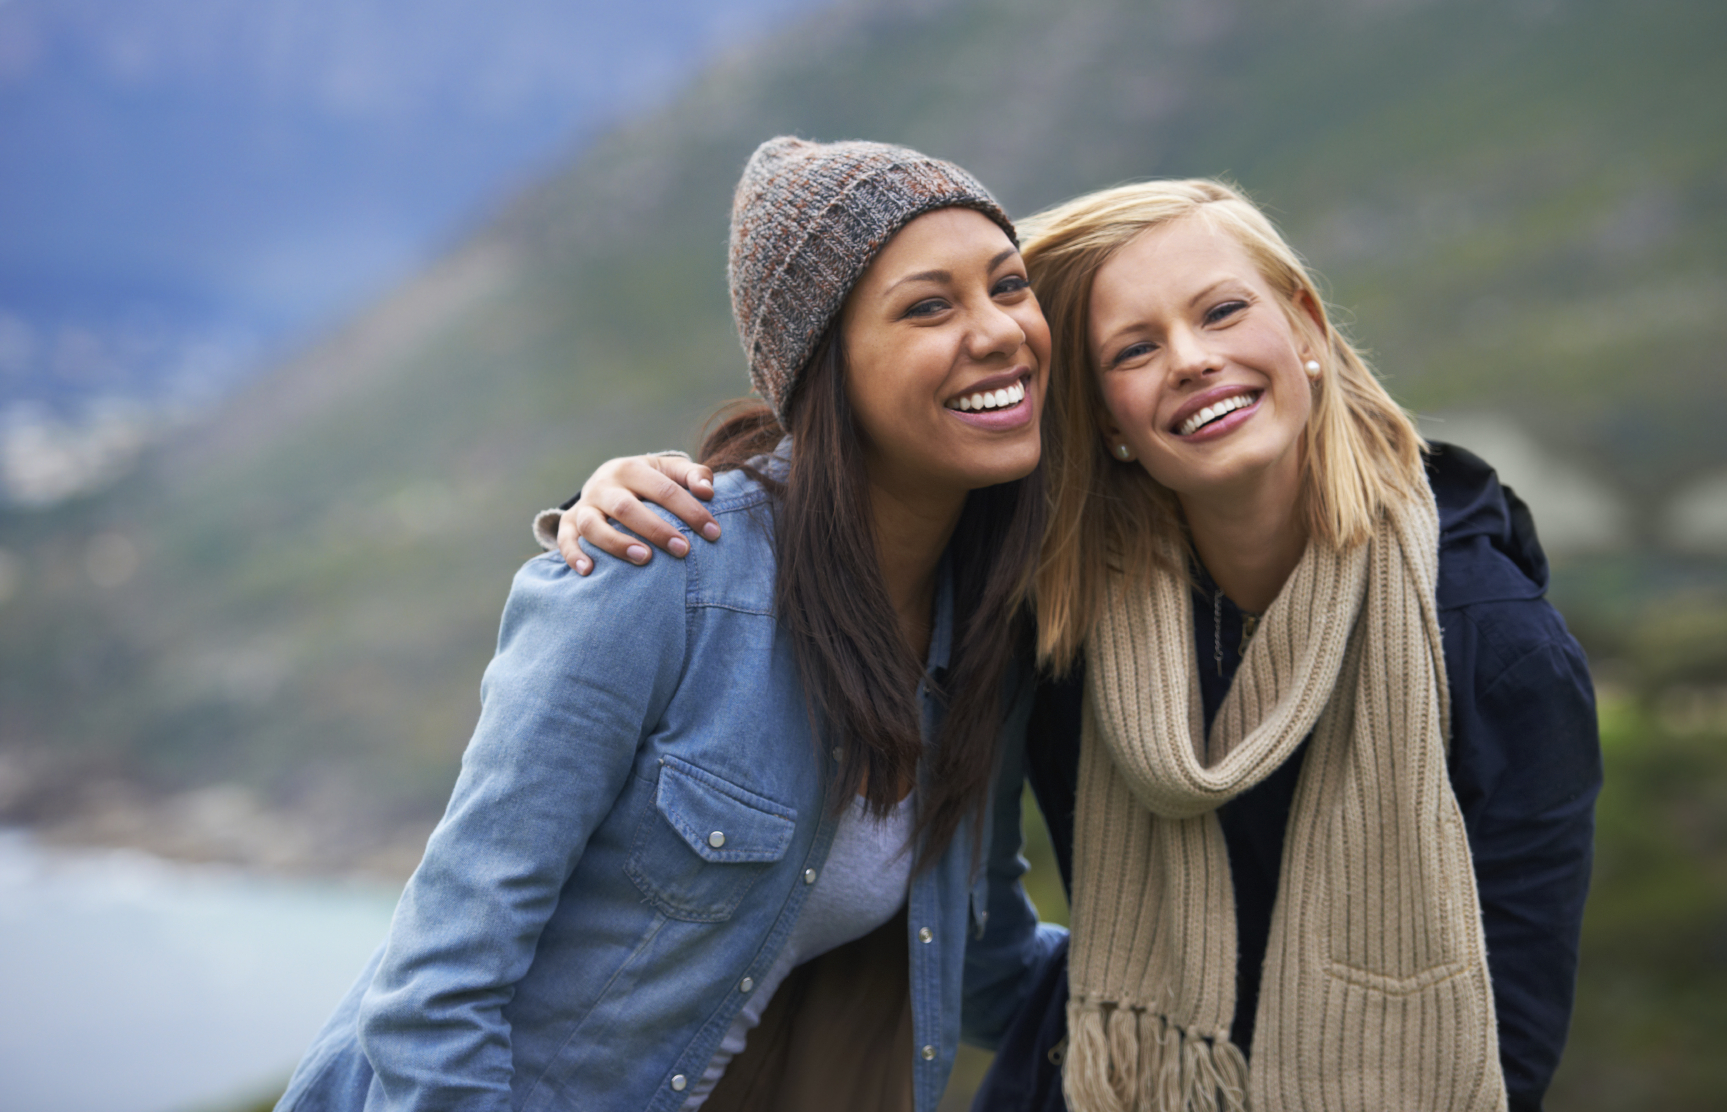 What Does A BFF Look Like? 3 Examples Of Friendship In The Bible